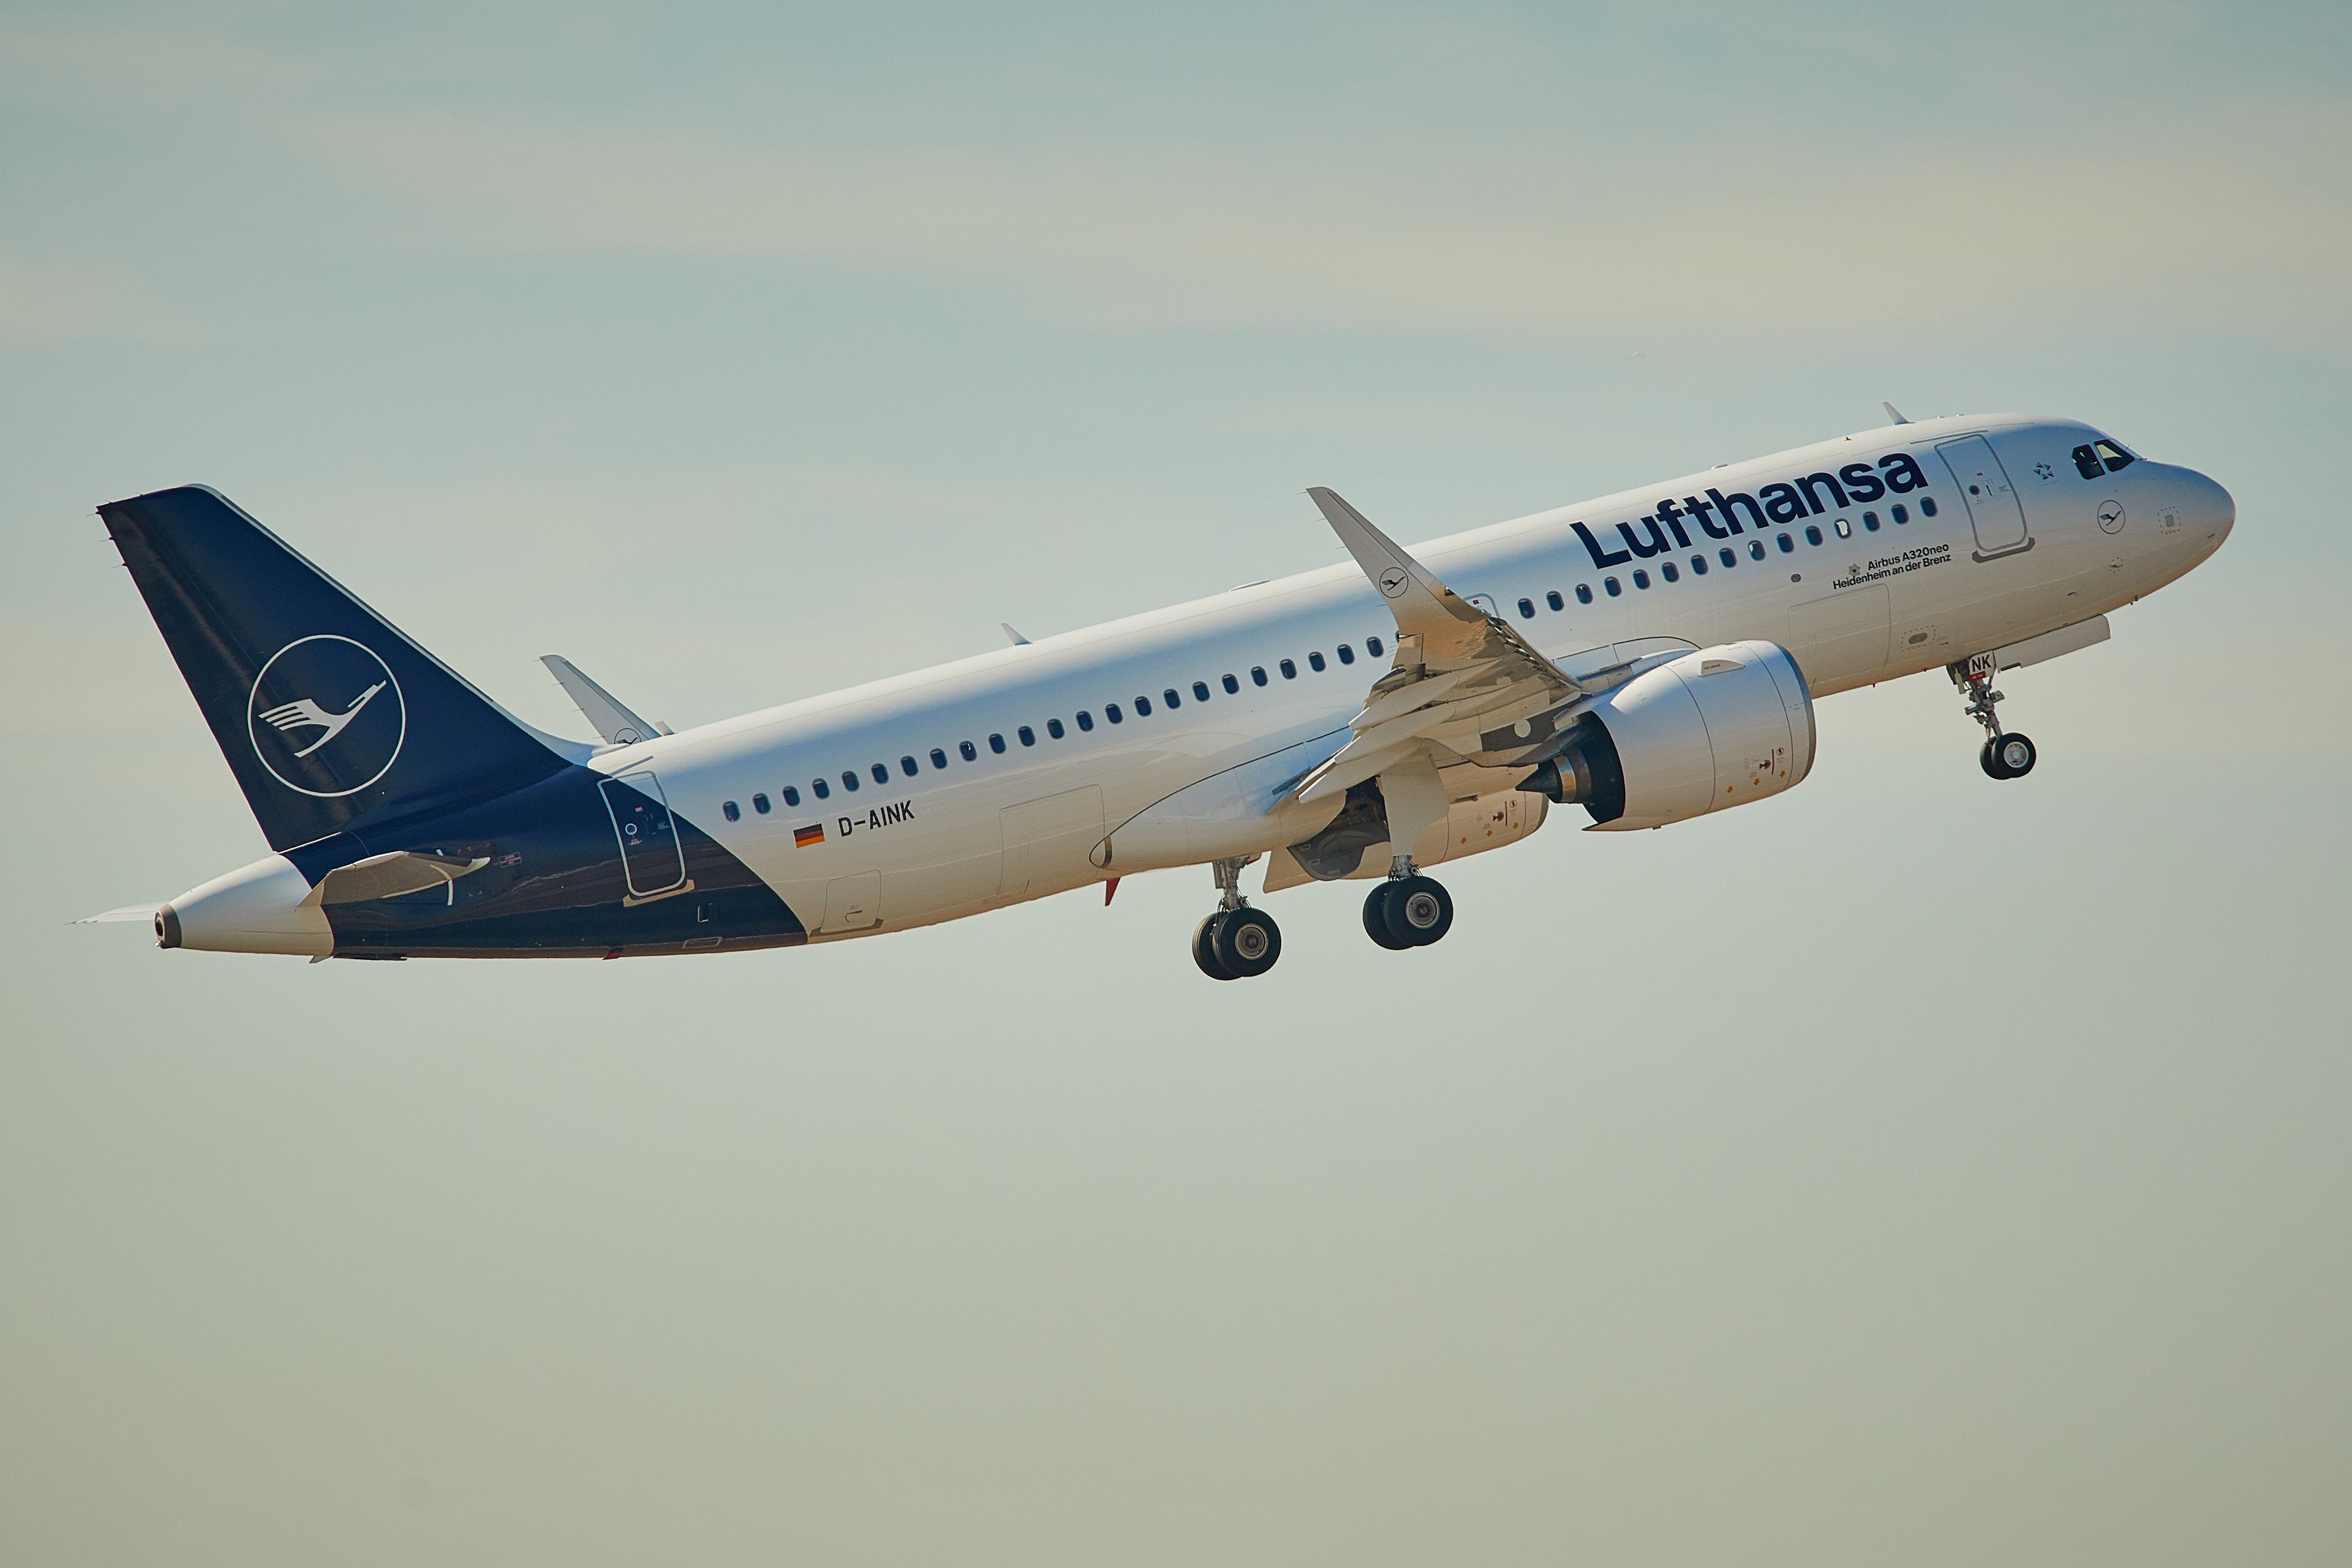 A Lufthansa Airbus a319NEO in the new livery